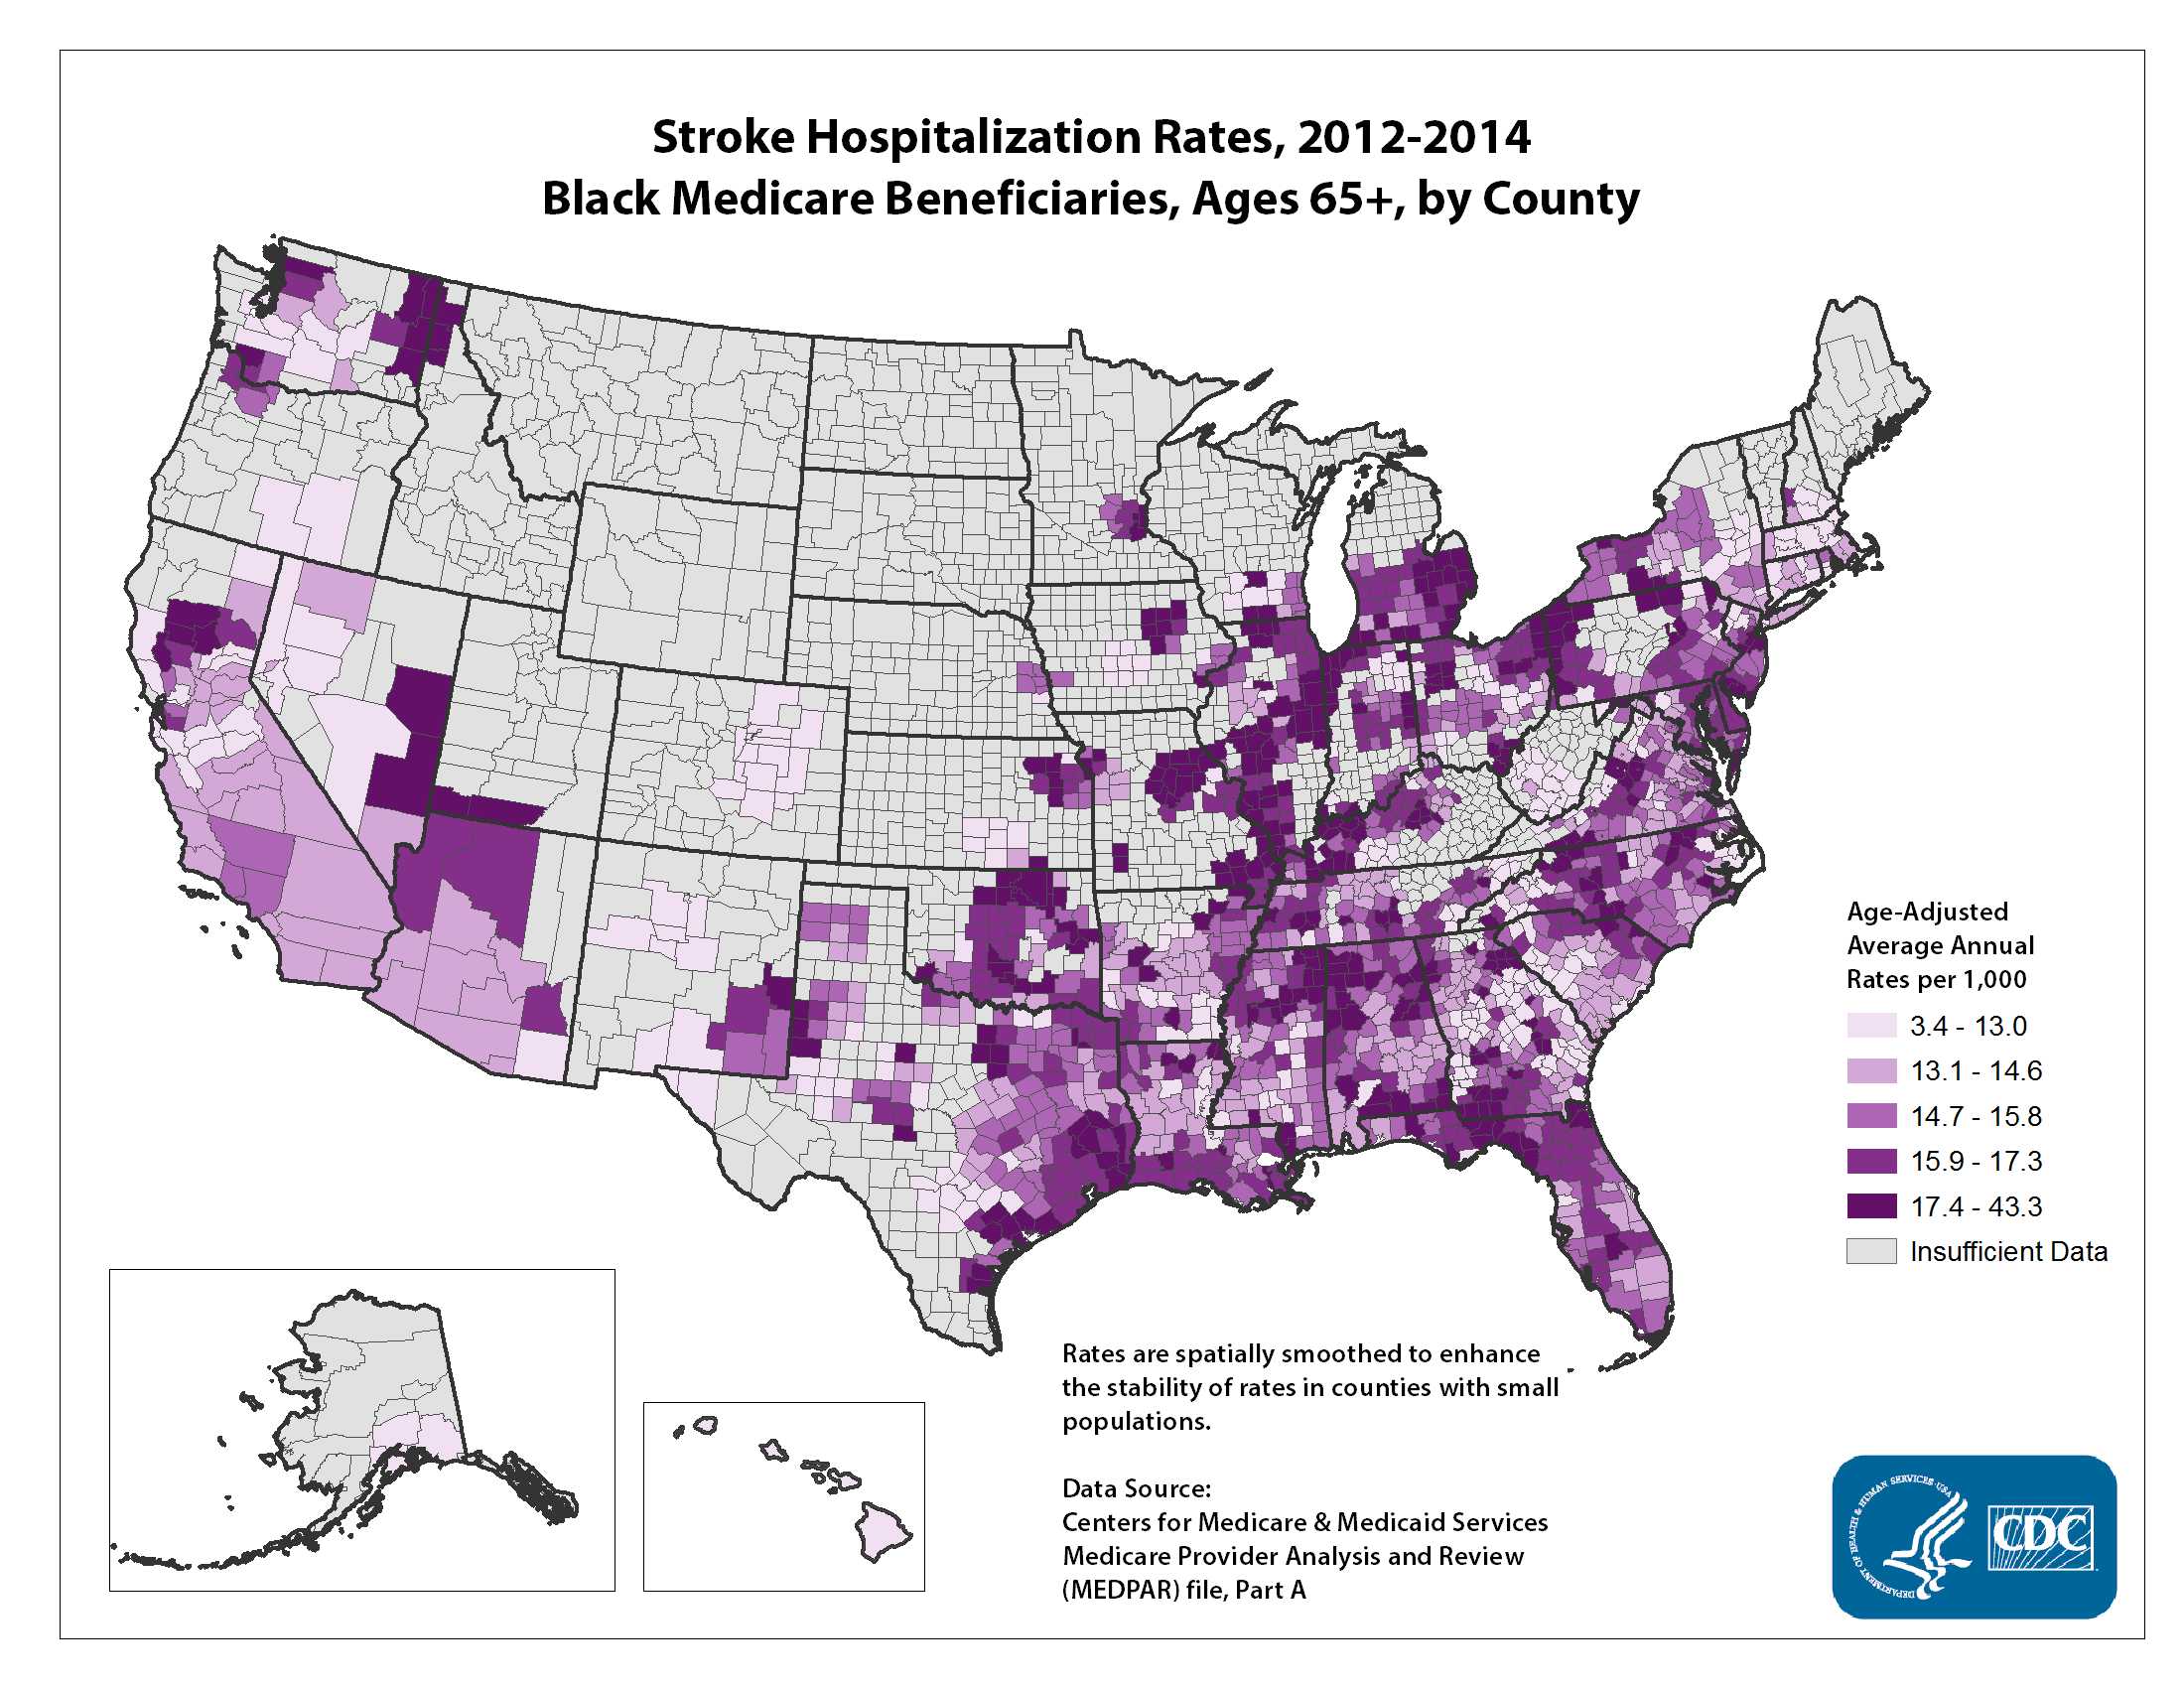 Stroke Hospitalization Rates for 2010 through 2012 for Blacks Aged 65 Years and Older by County. The map shows that concentrations of counties with the highest stroke hospitalization rates - meaning the top quintile - are located primarily in parts of the Southeast, Oklahoma, Arkansas, Pennsylvania, Ohio, Illinois, and Michigan.